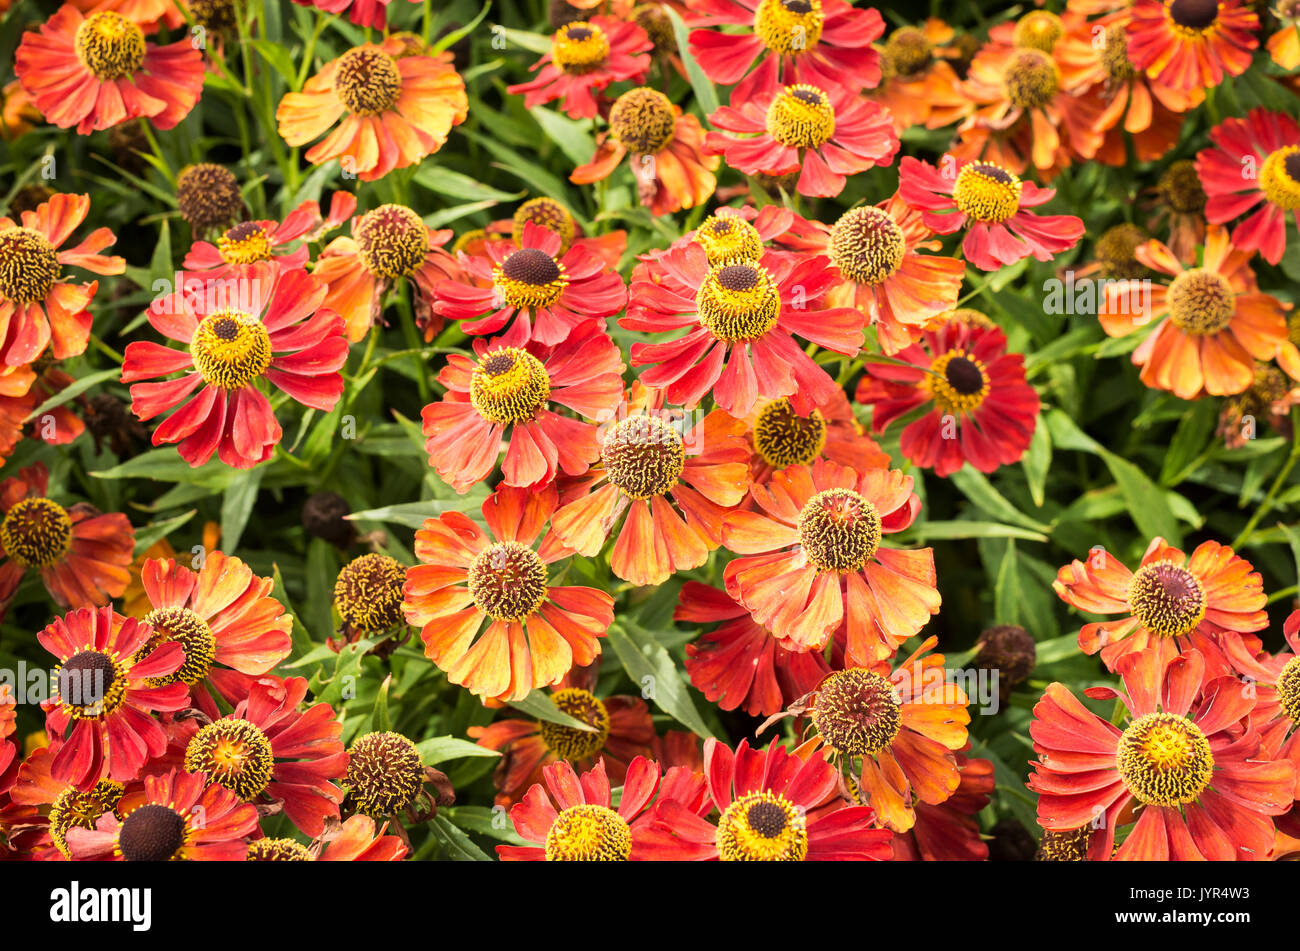 Densely planted red and orange Helenium plants in full bloom in Summer Stock Photo